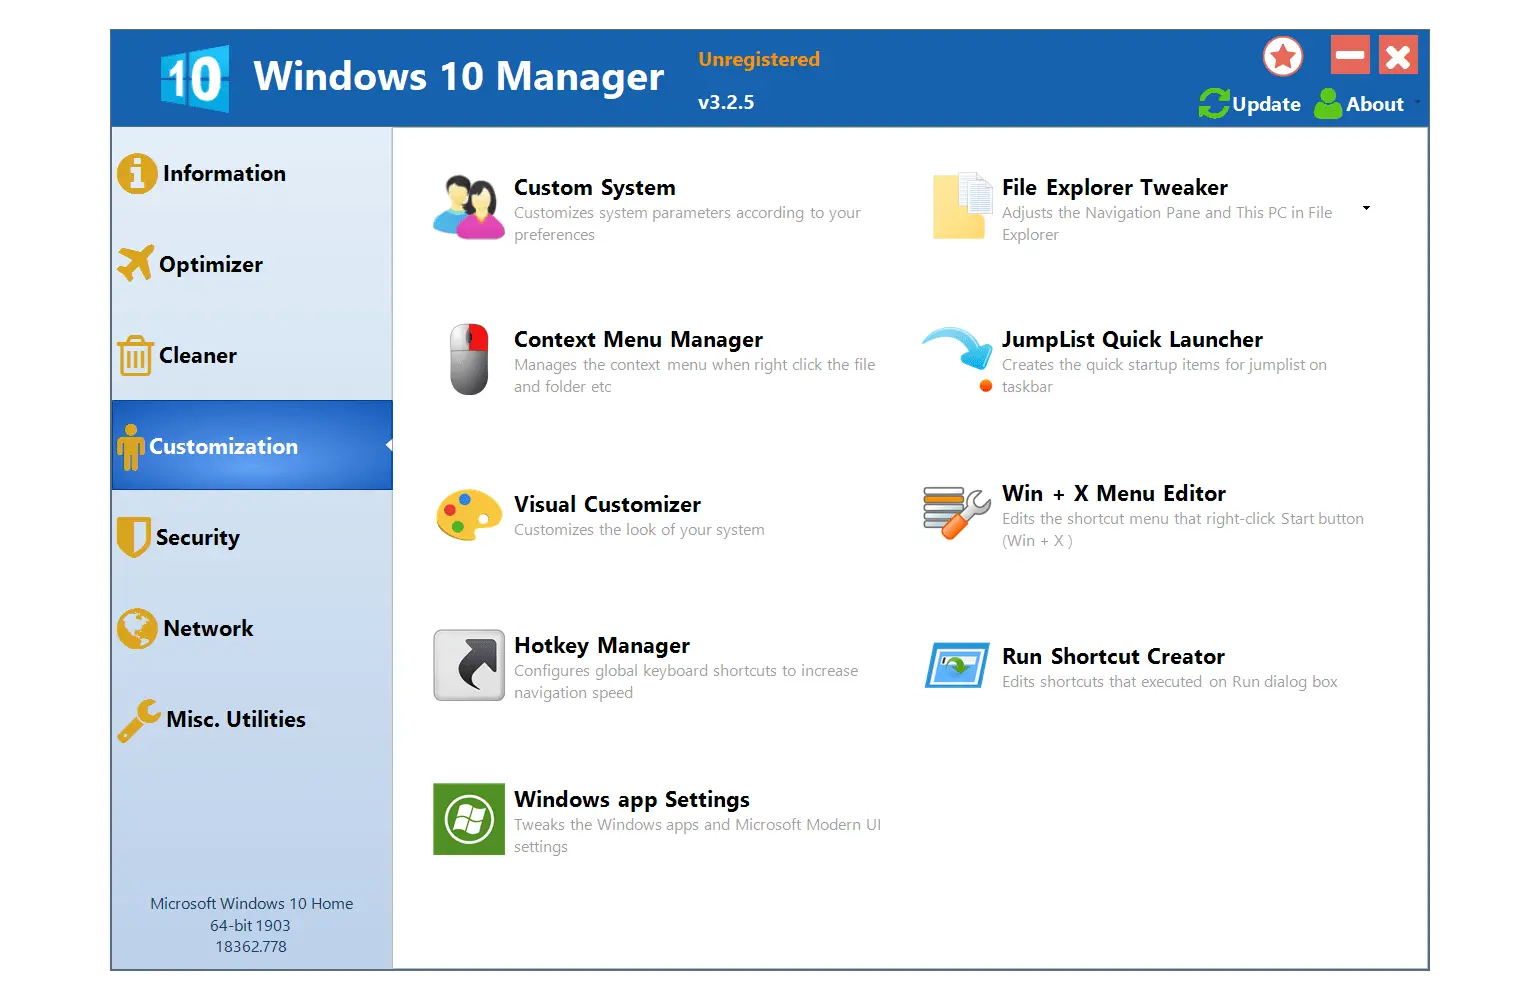 Windows 10 Manager 3.8.4 free download